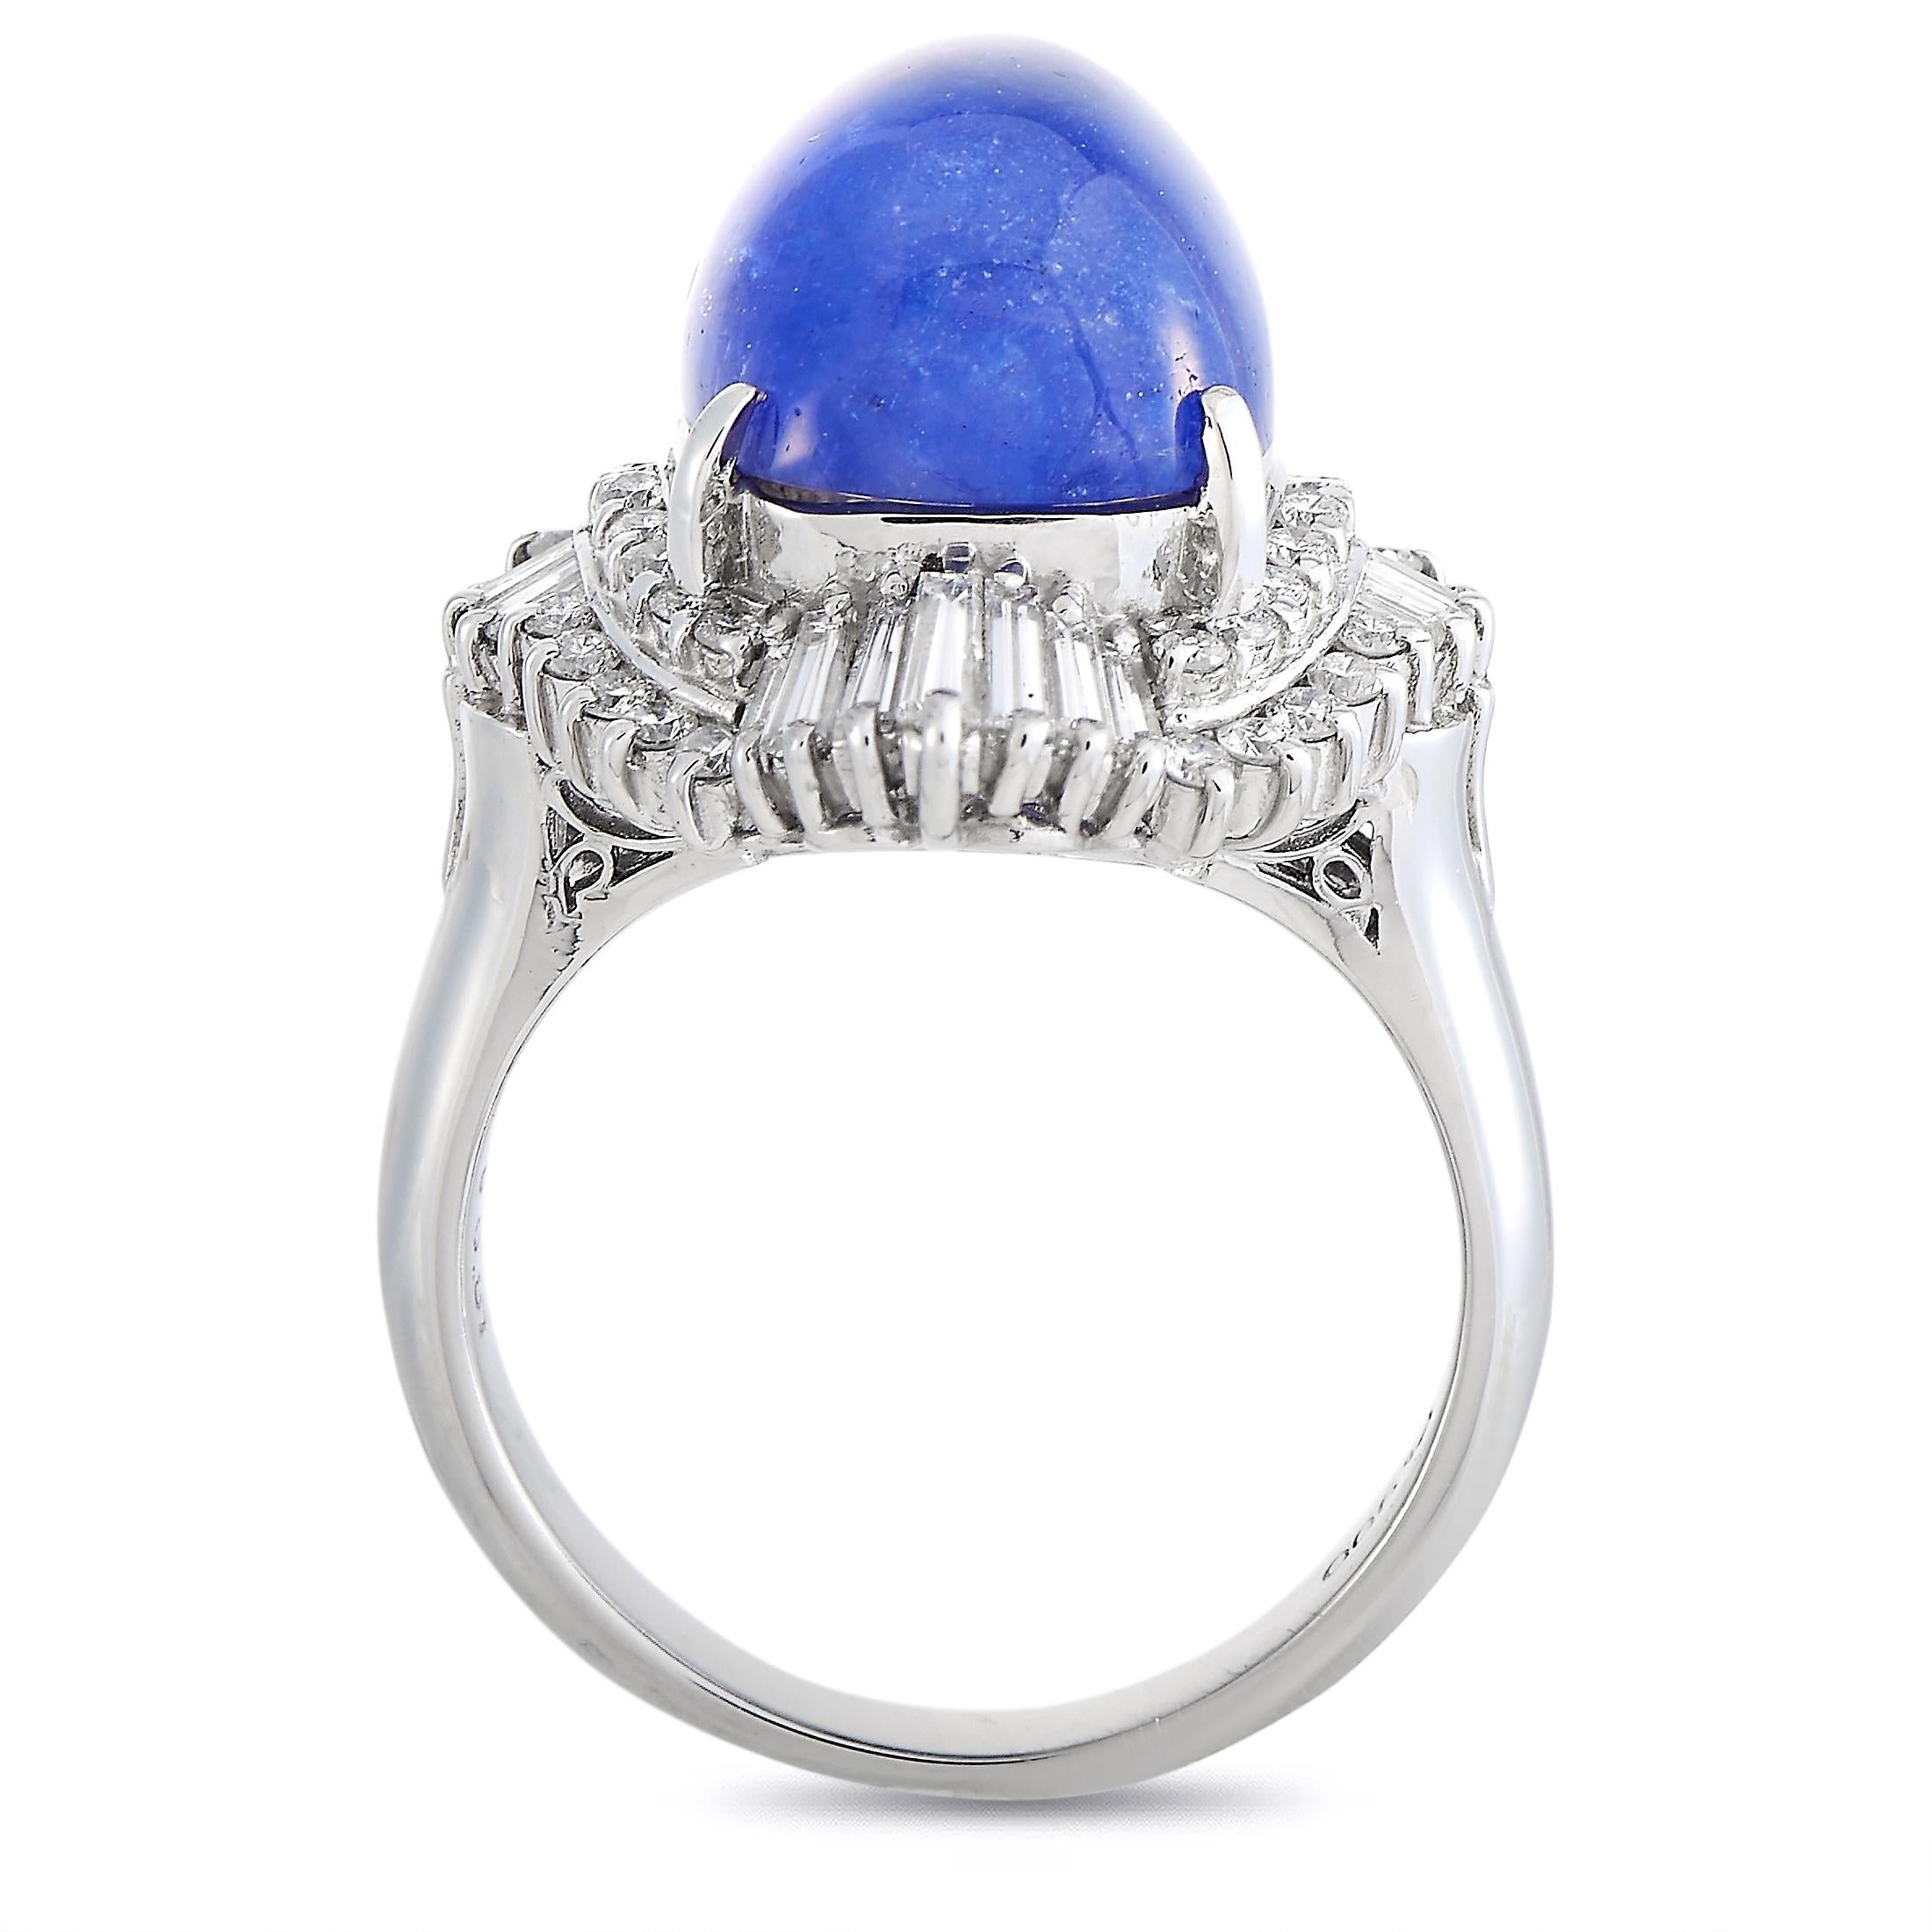 This LB Exclusive ring is made of platinum and embellished with a 9.11 ct tanzanite and a total of 0.87 carats of diamonds. The ring weighs 12.6 grams and boasts band thickness of 3 mm and top height of 12 mm, while top dimensions measure 22 by 18